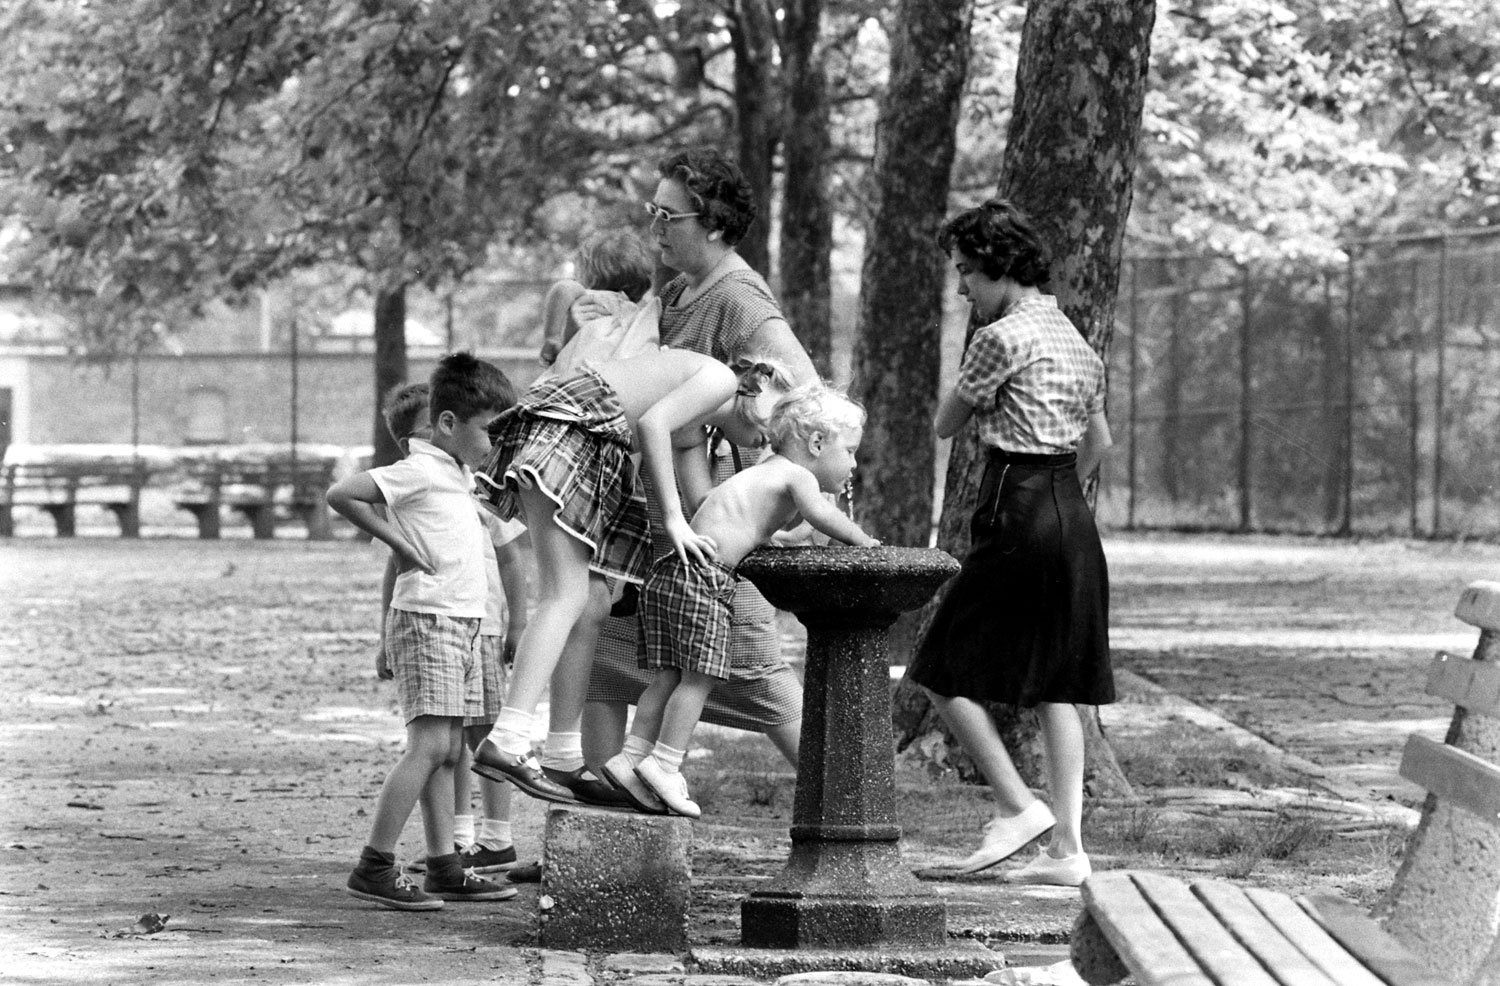 Water fountain, Central Park, 1961.